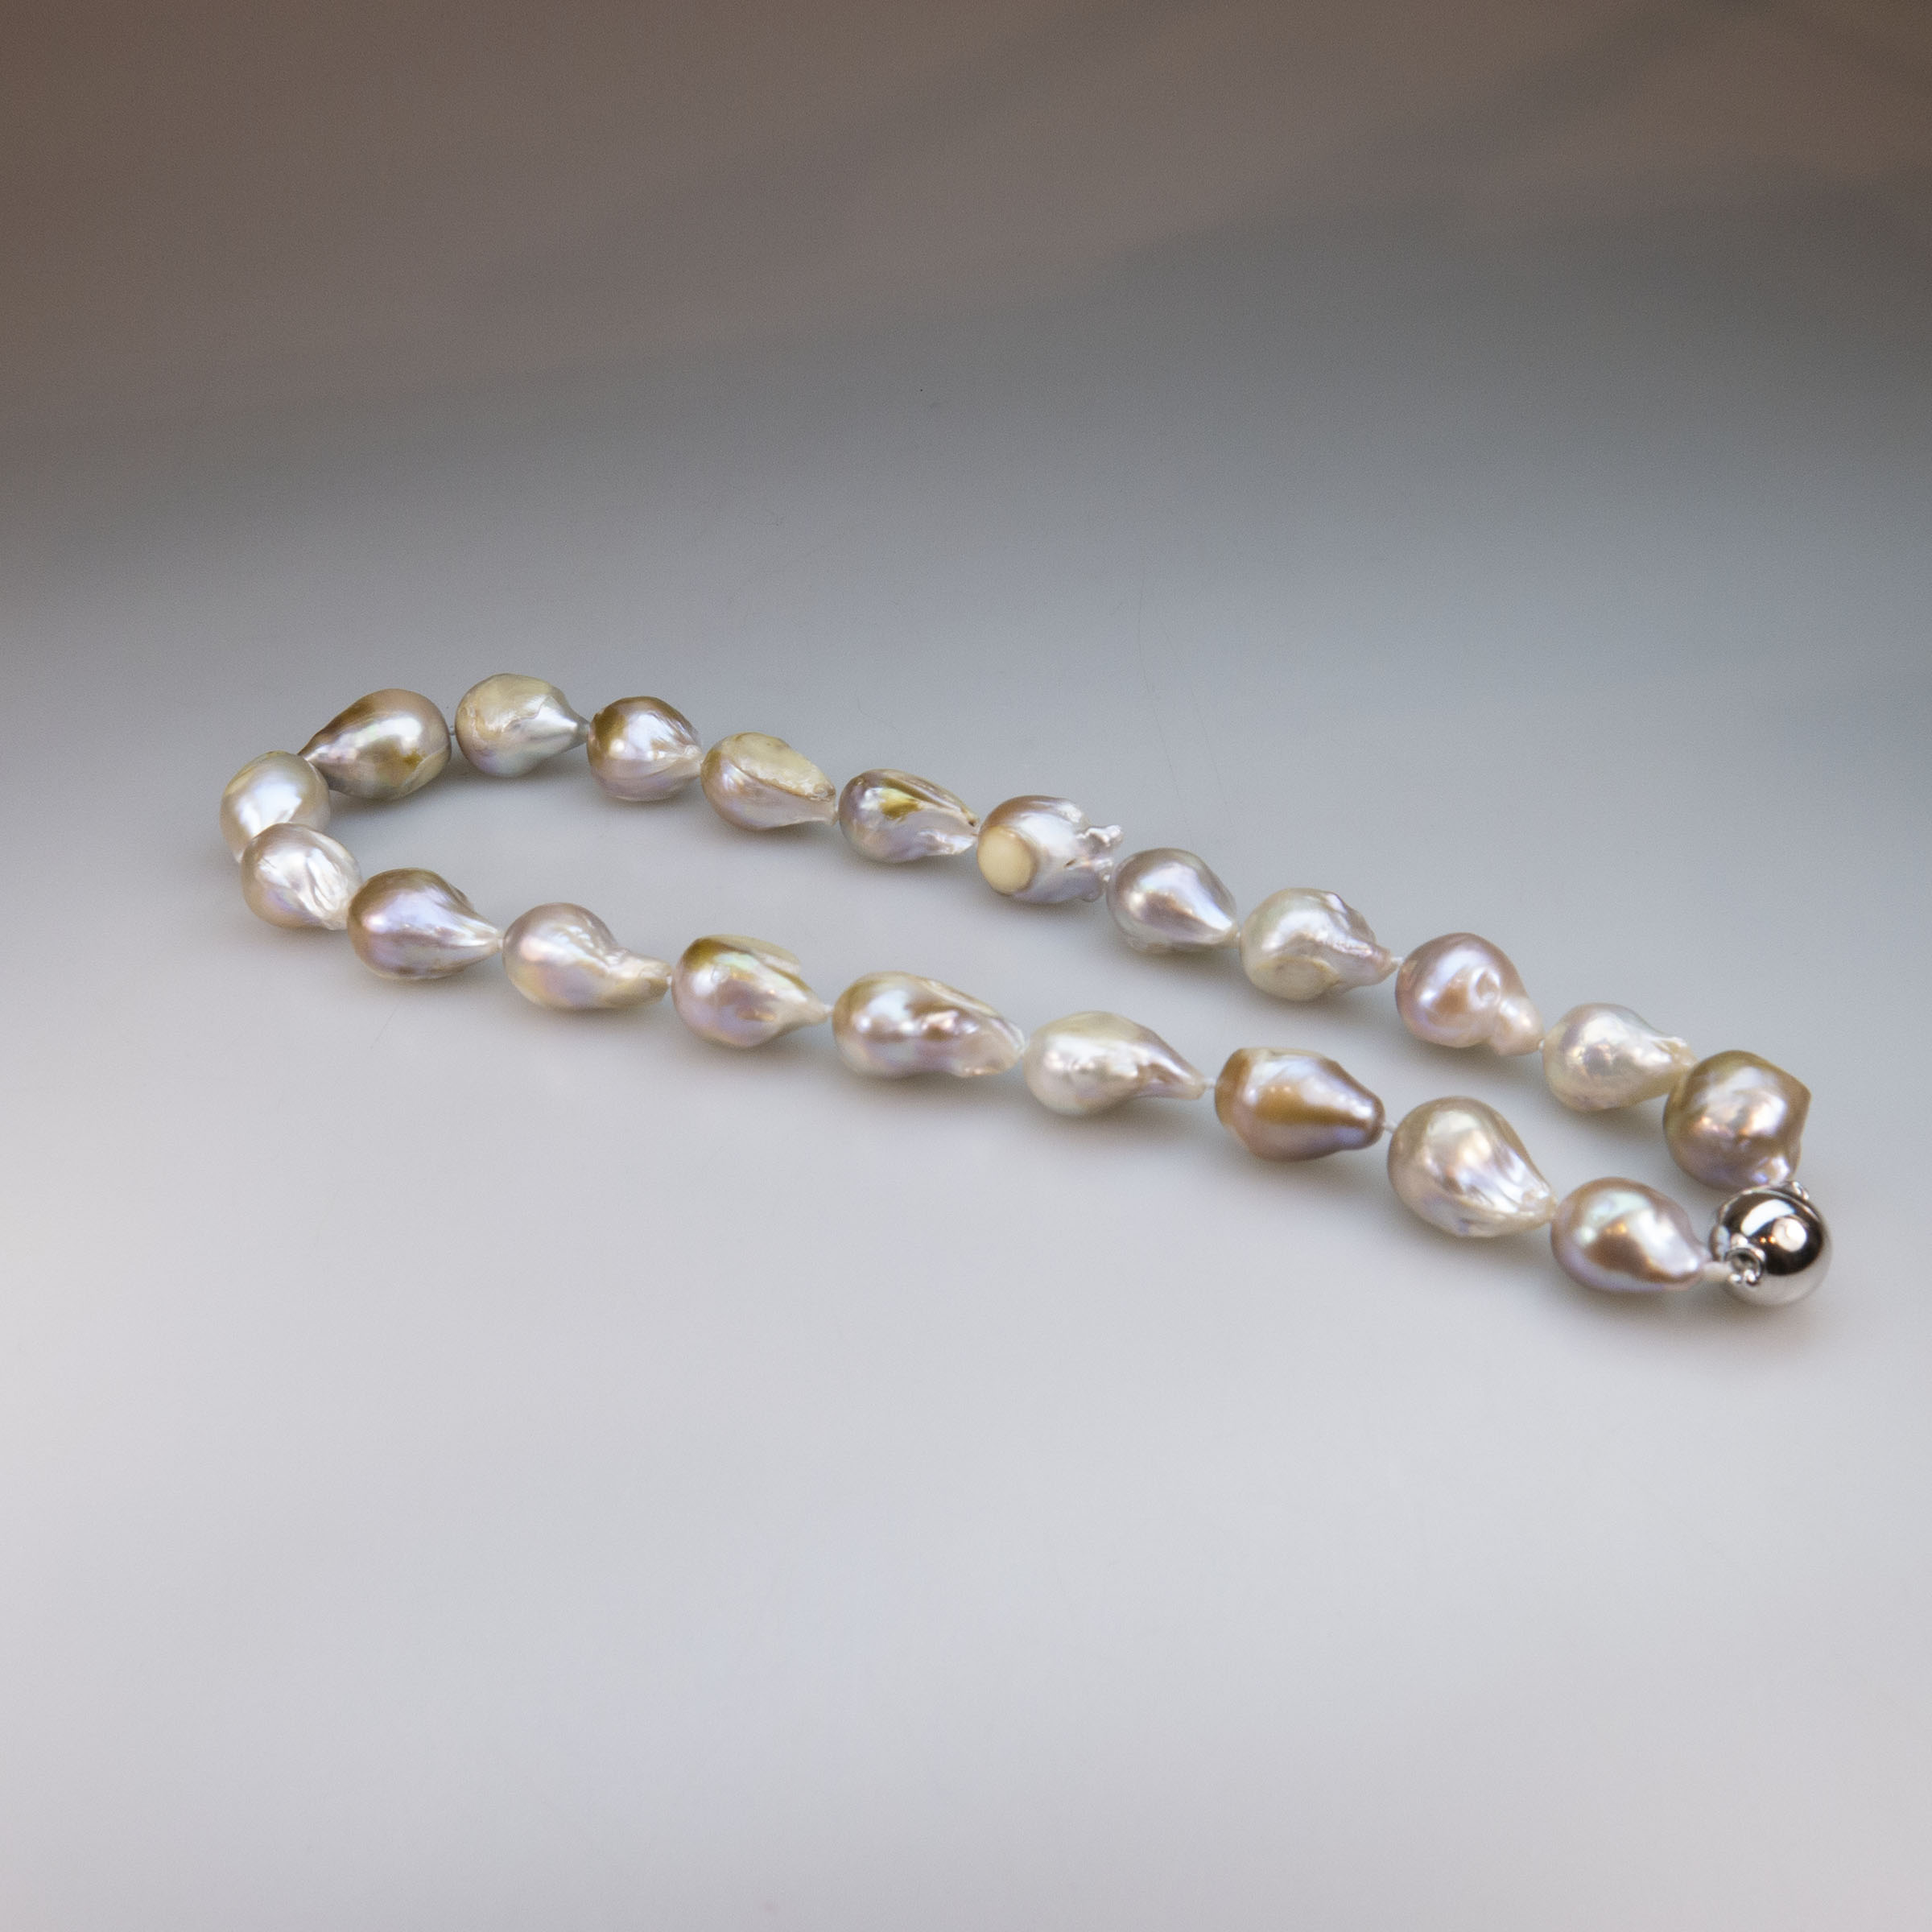 Single Strand Of Baroque Freshwater Pearls